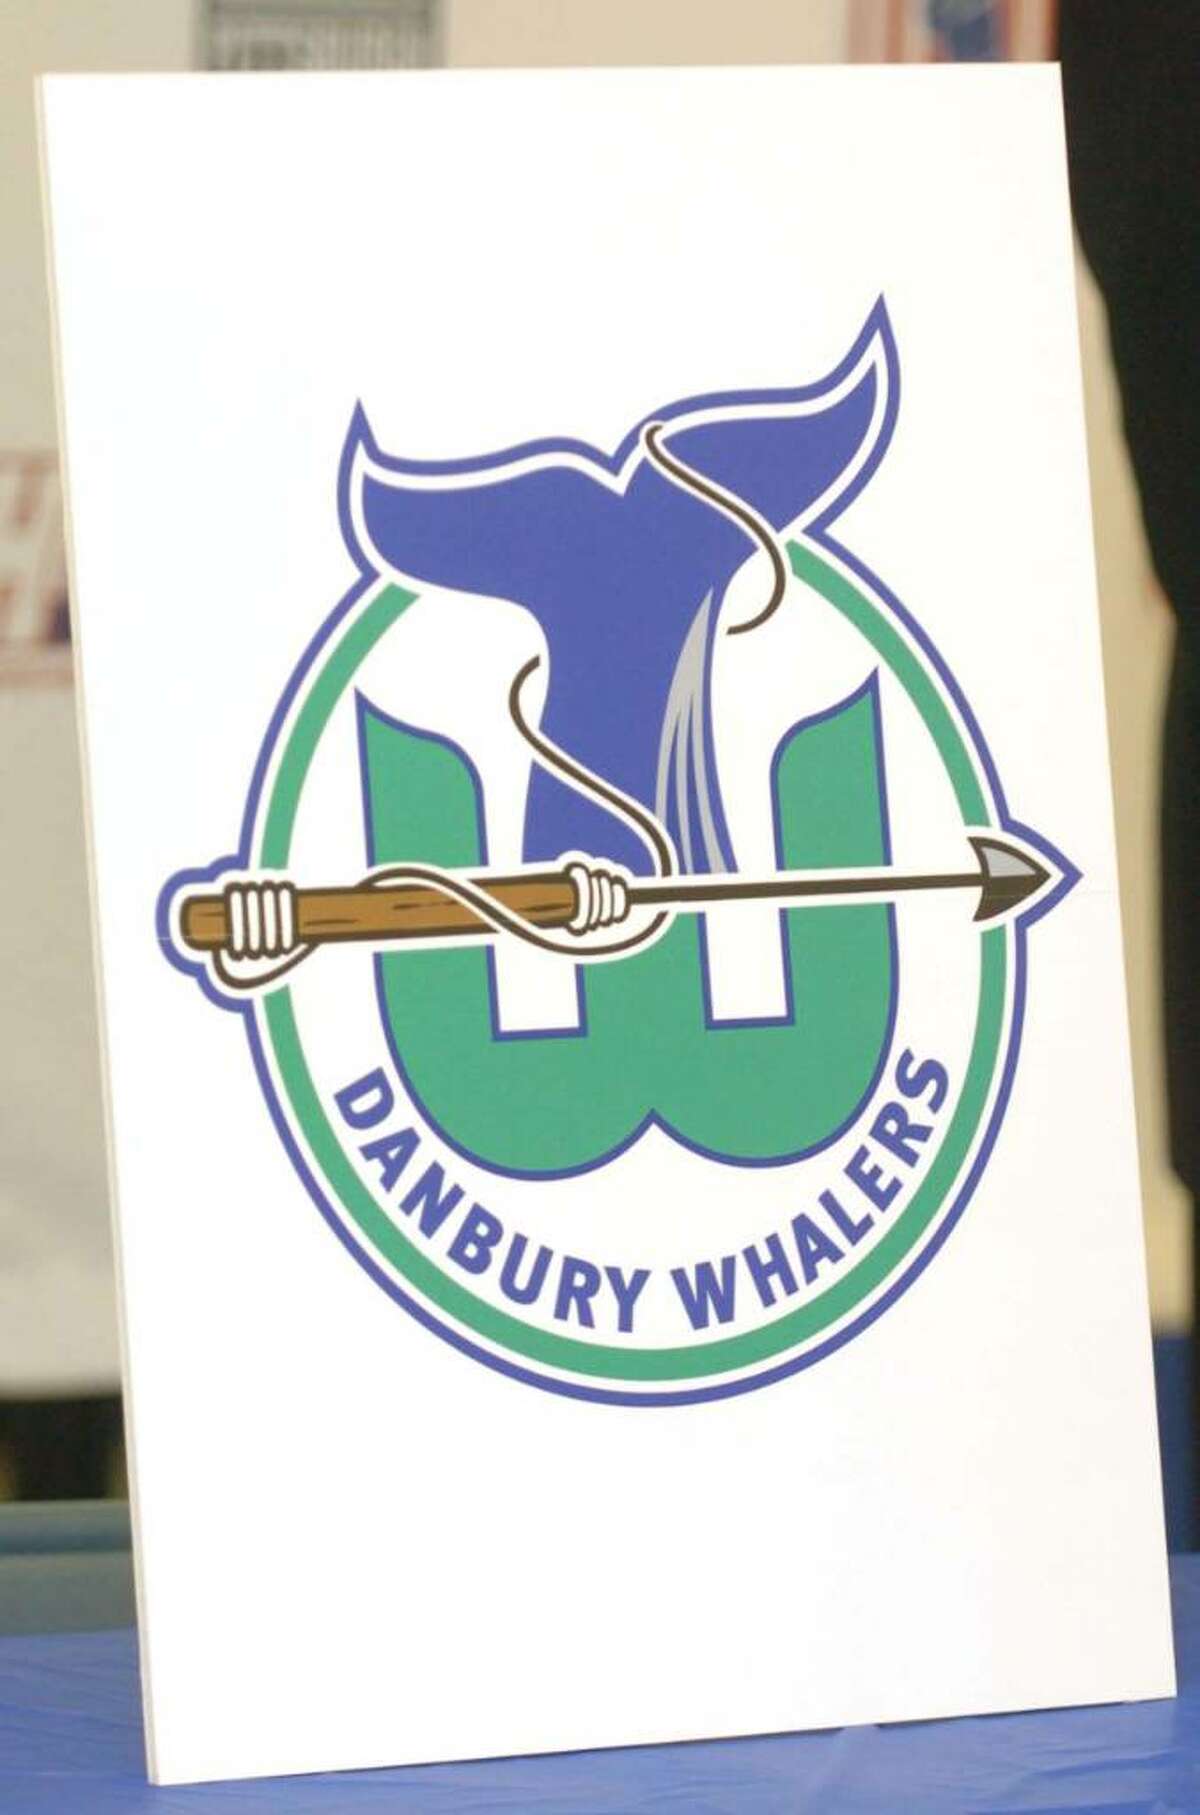 Logos presented at a press confrence for the Danbury Whalers at the Danbury Ice Arena Tuesday, Dec. 29, 2009.